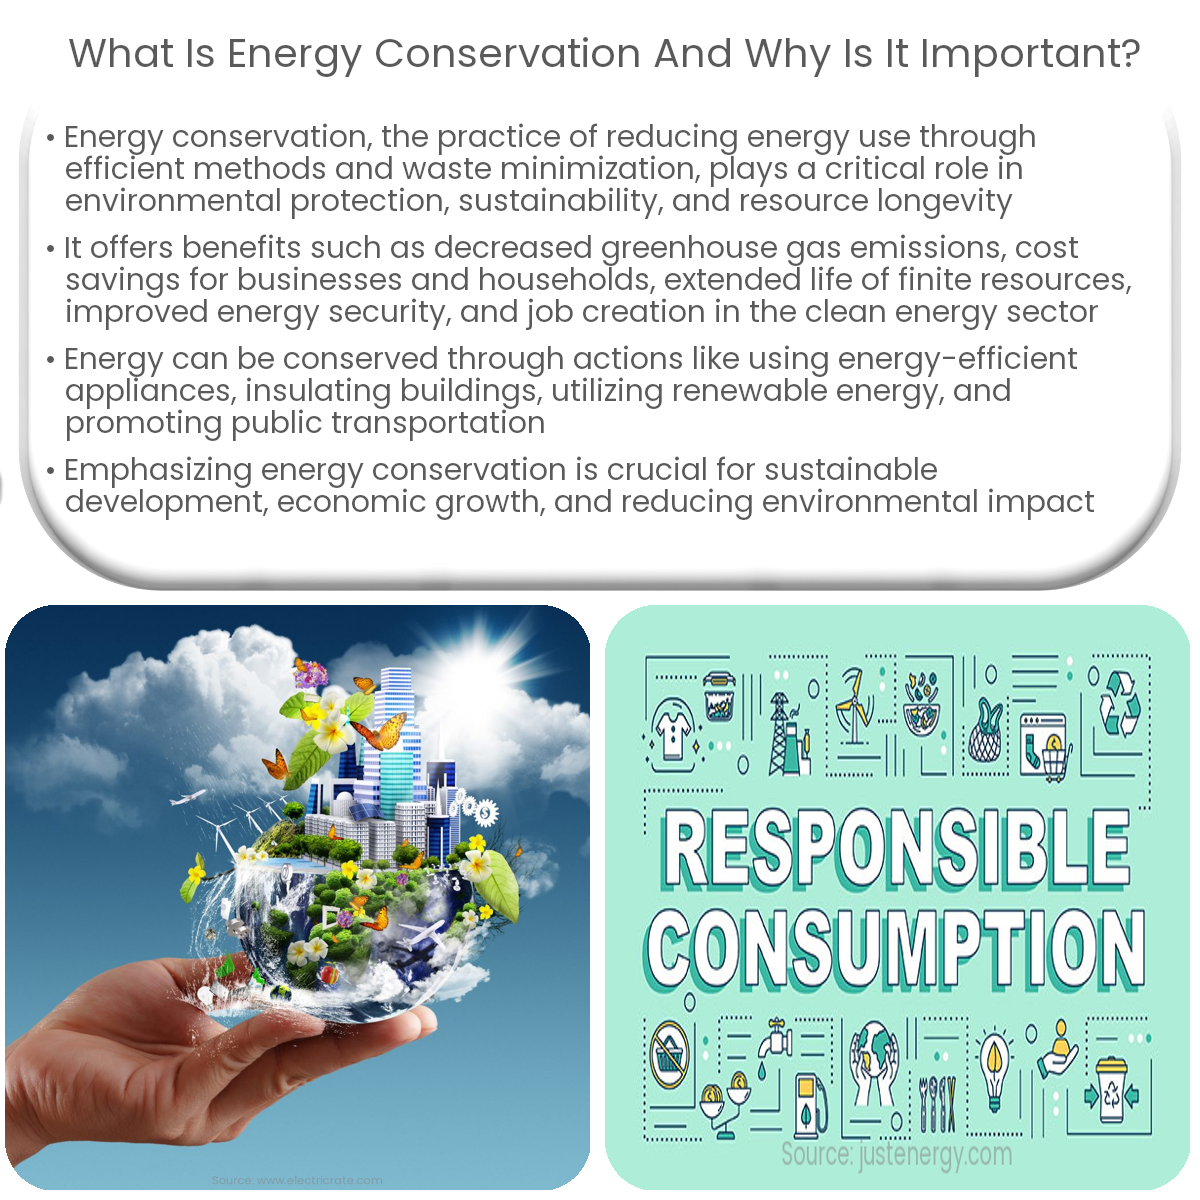 What is energy conservation and why is it important?